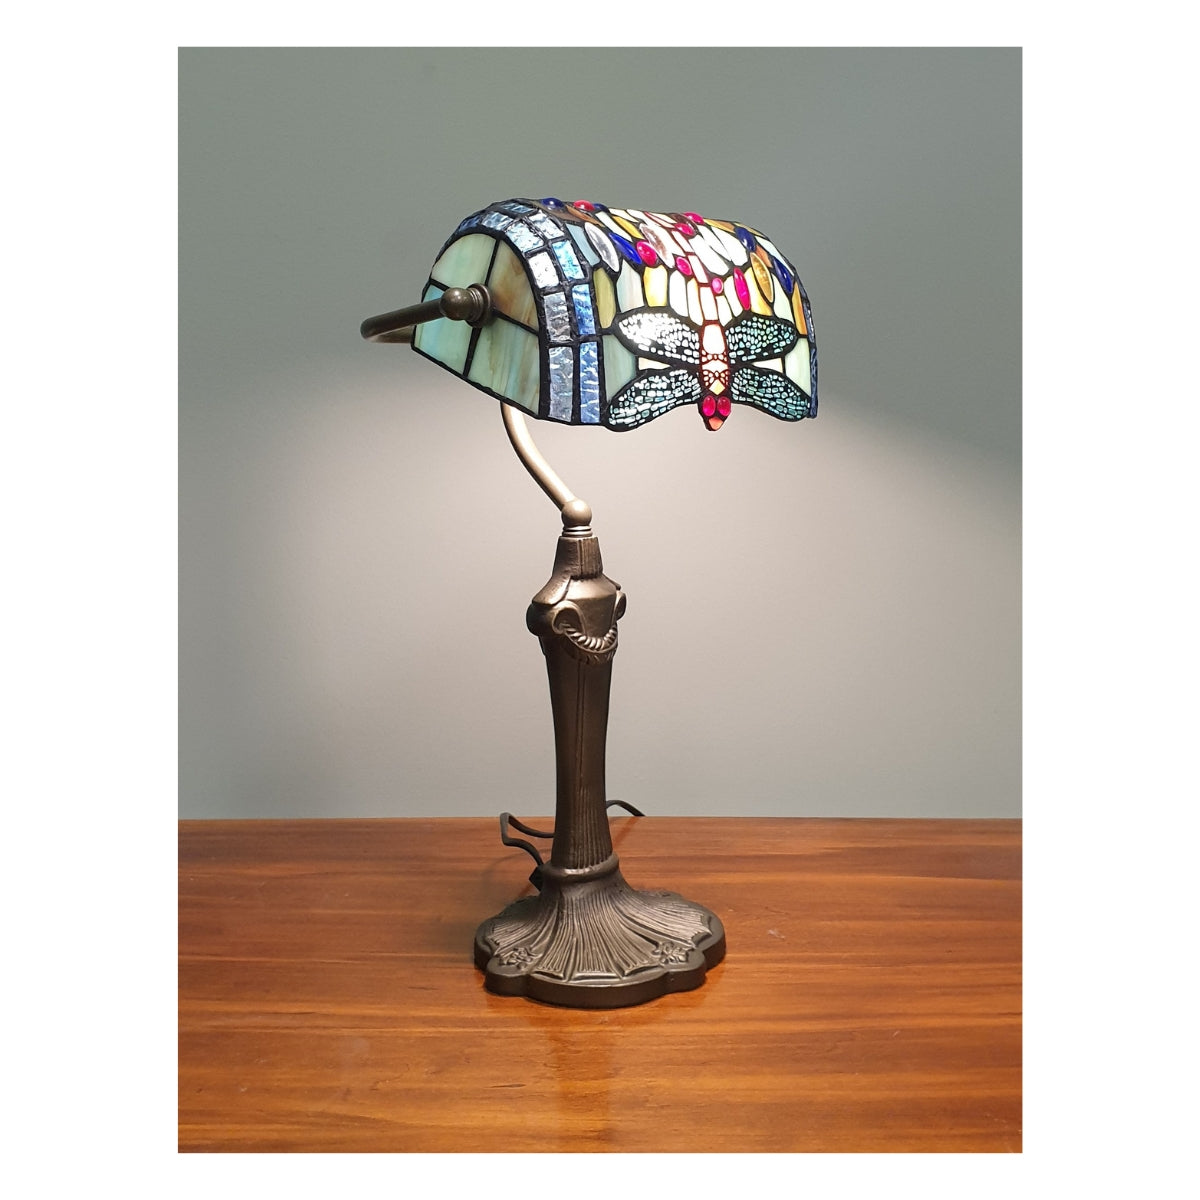 Tiffany style bankers lamp